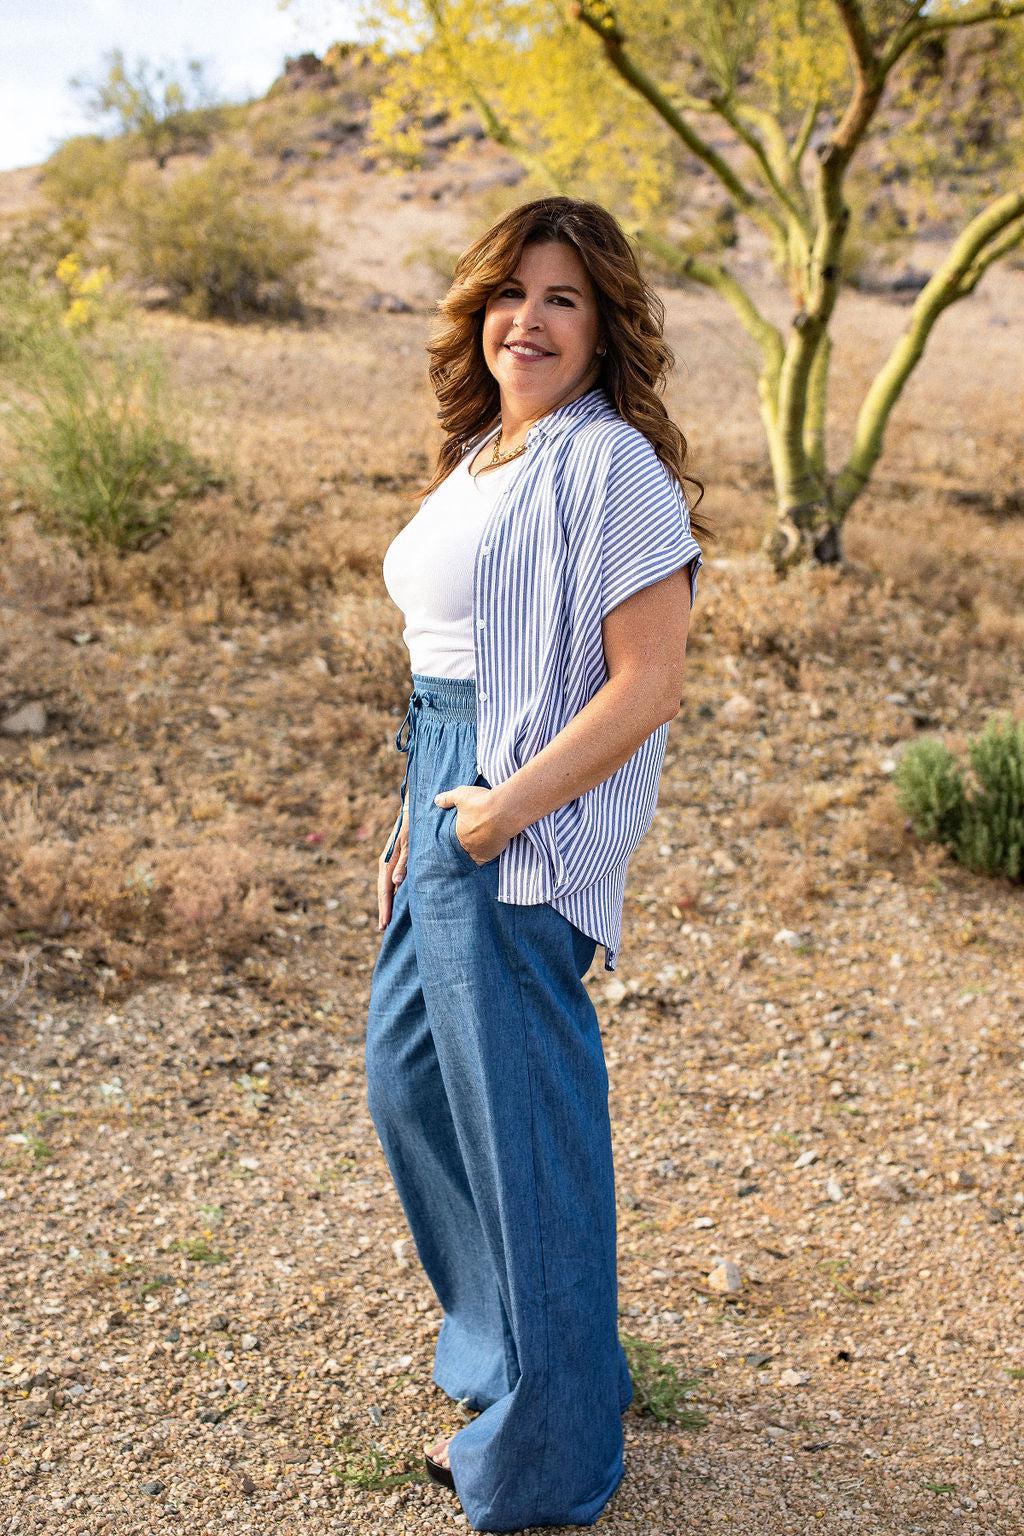 Chambray Wide Leg Pants-160 Bottoms-Chambray Wide Leg Pants, Elastic Waist Wide Leg Pants, High Waisted Wide Leg Pants, Wide Leg Pants-Medium-[option4]-[option5]-[option6]-Womens-USA-Clothing-Boutique-Shop-Online-Clothes Minded